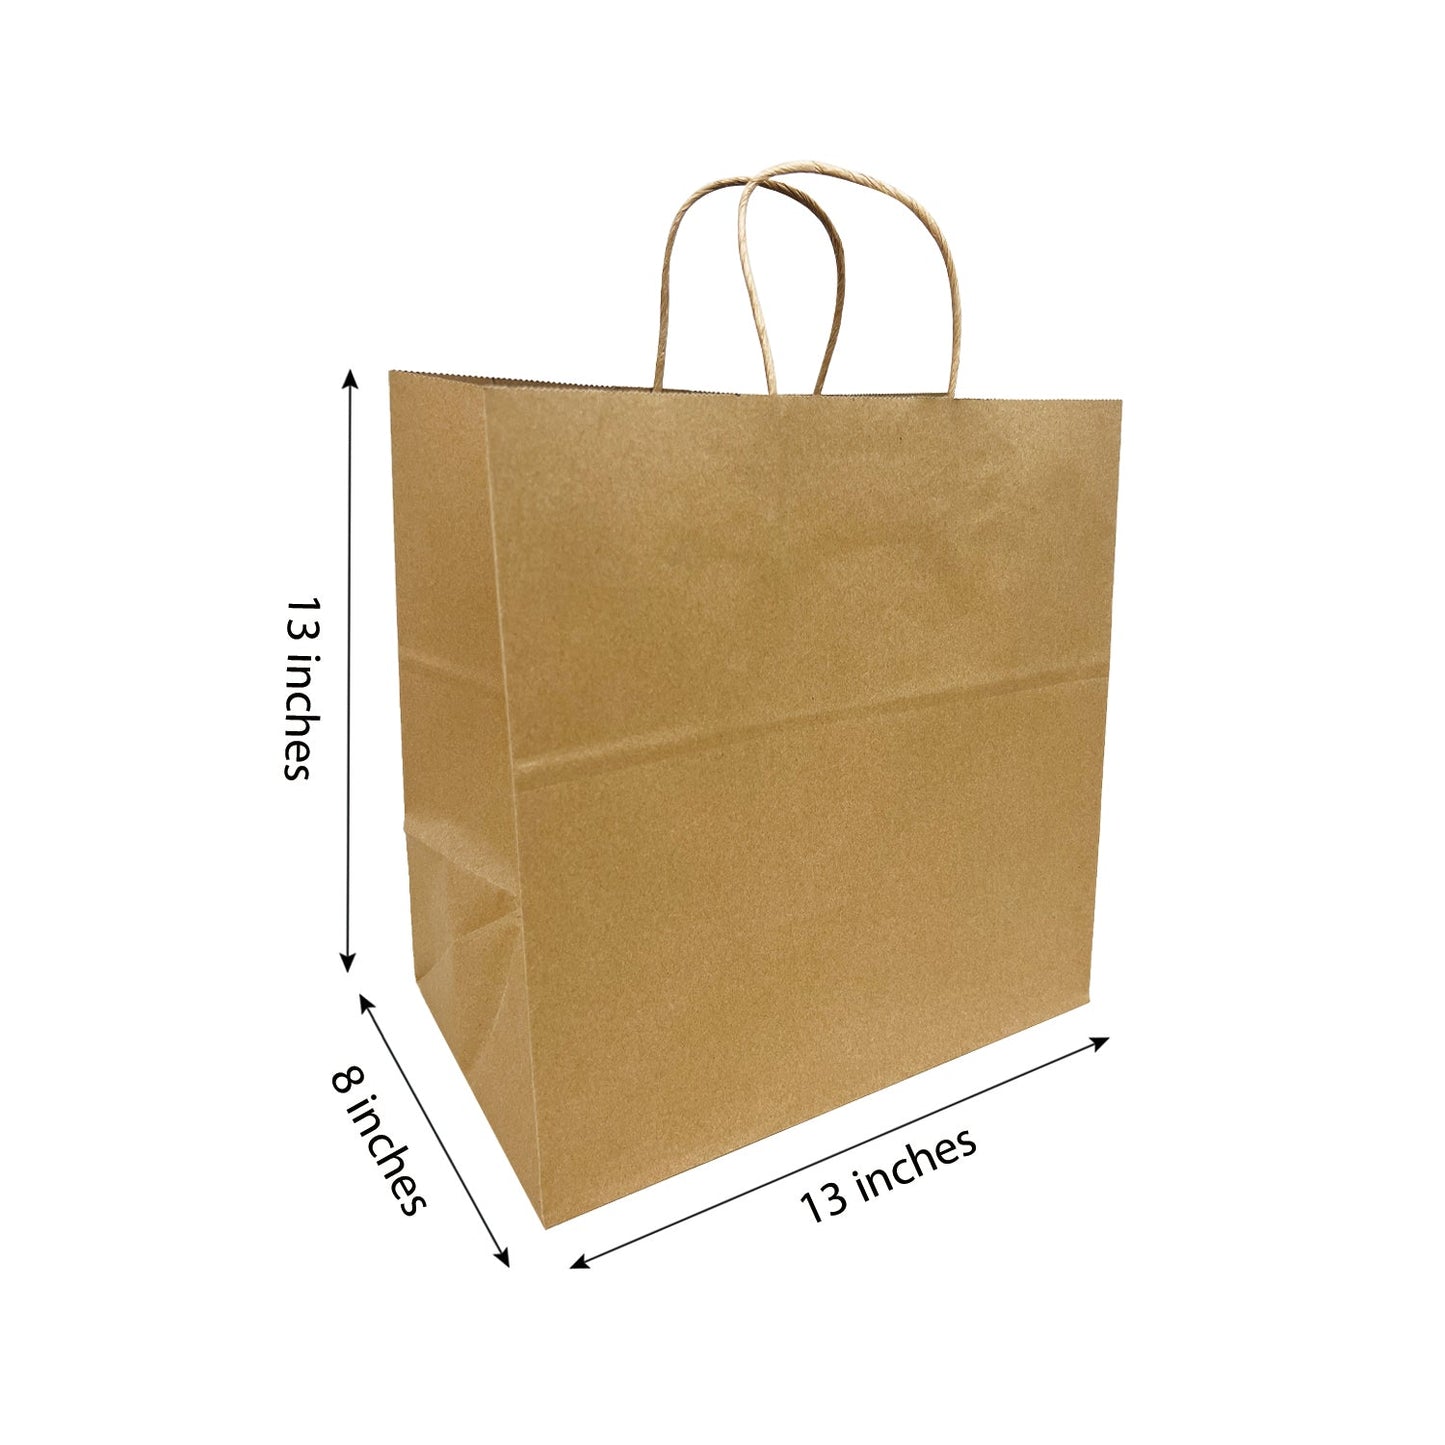 1383B | 200pcs Take Out 13x8x13 inches Kraft Paper Bag Cardboard Insert with Twisted Handles, $0.56/pc